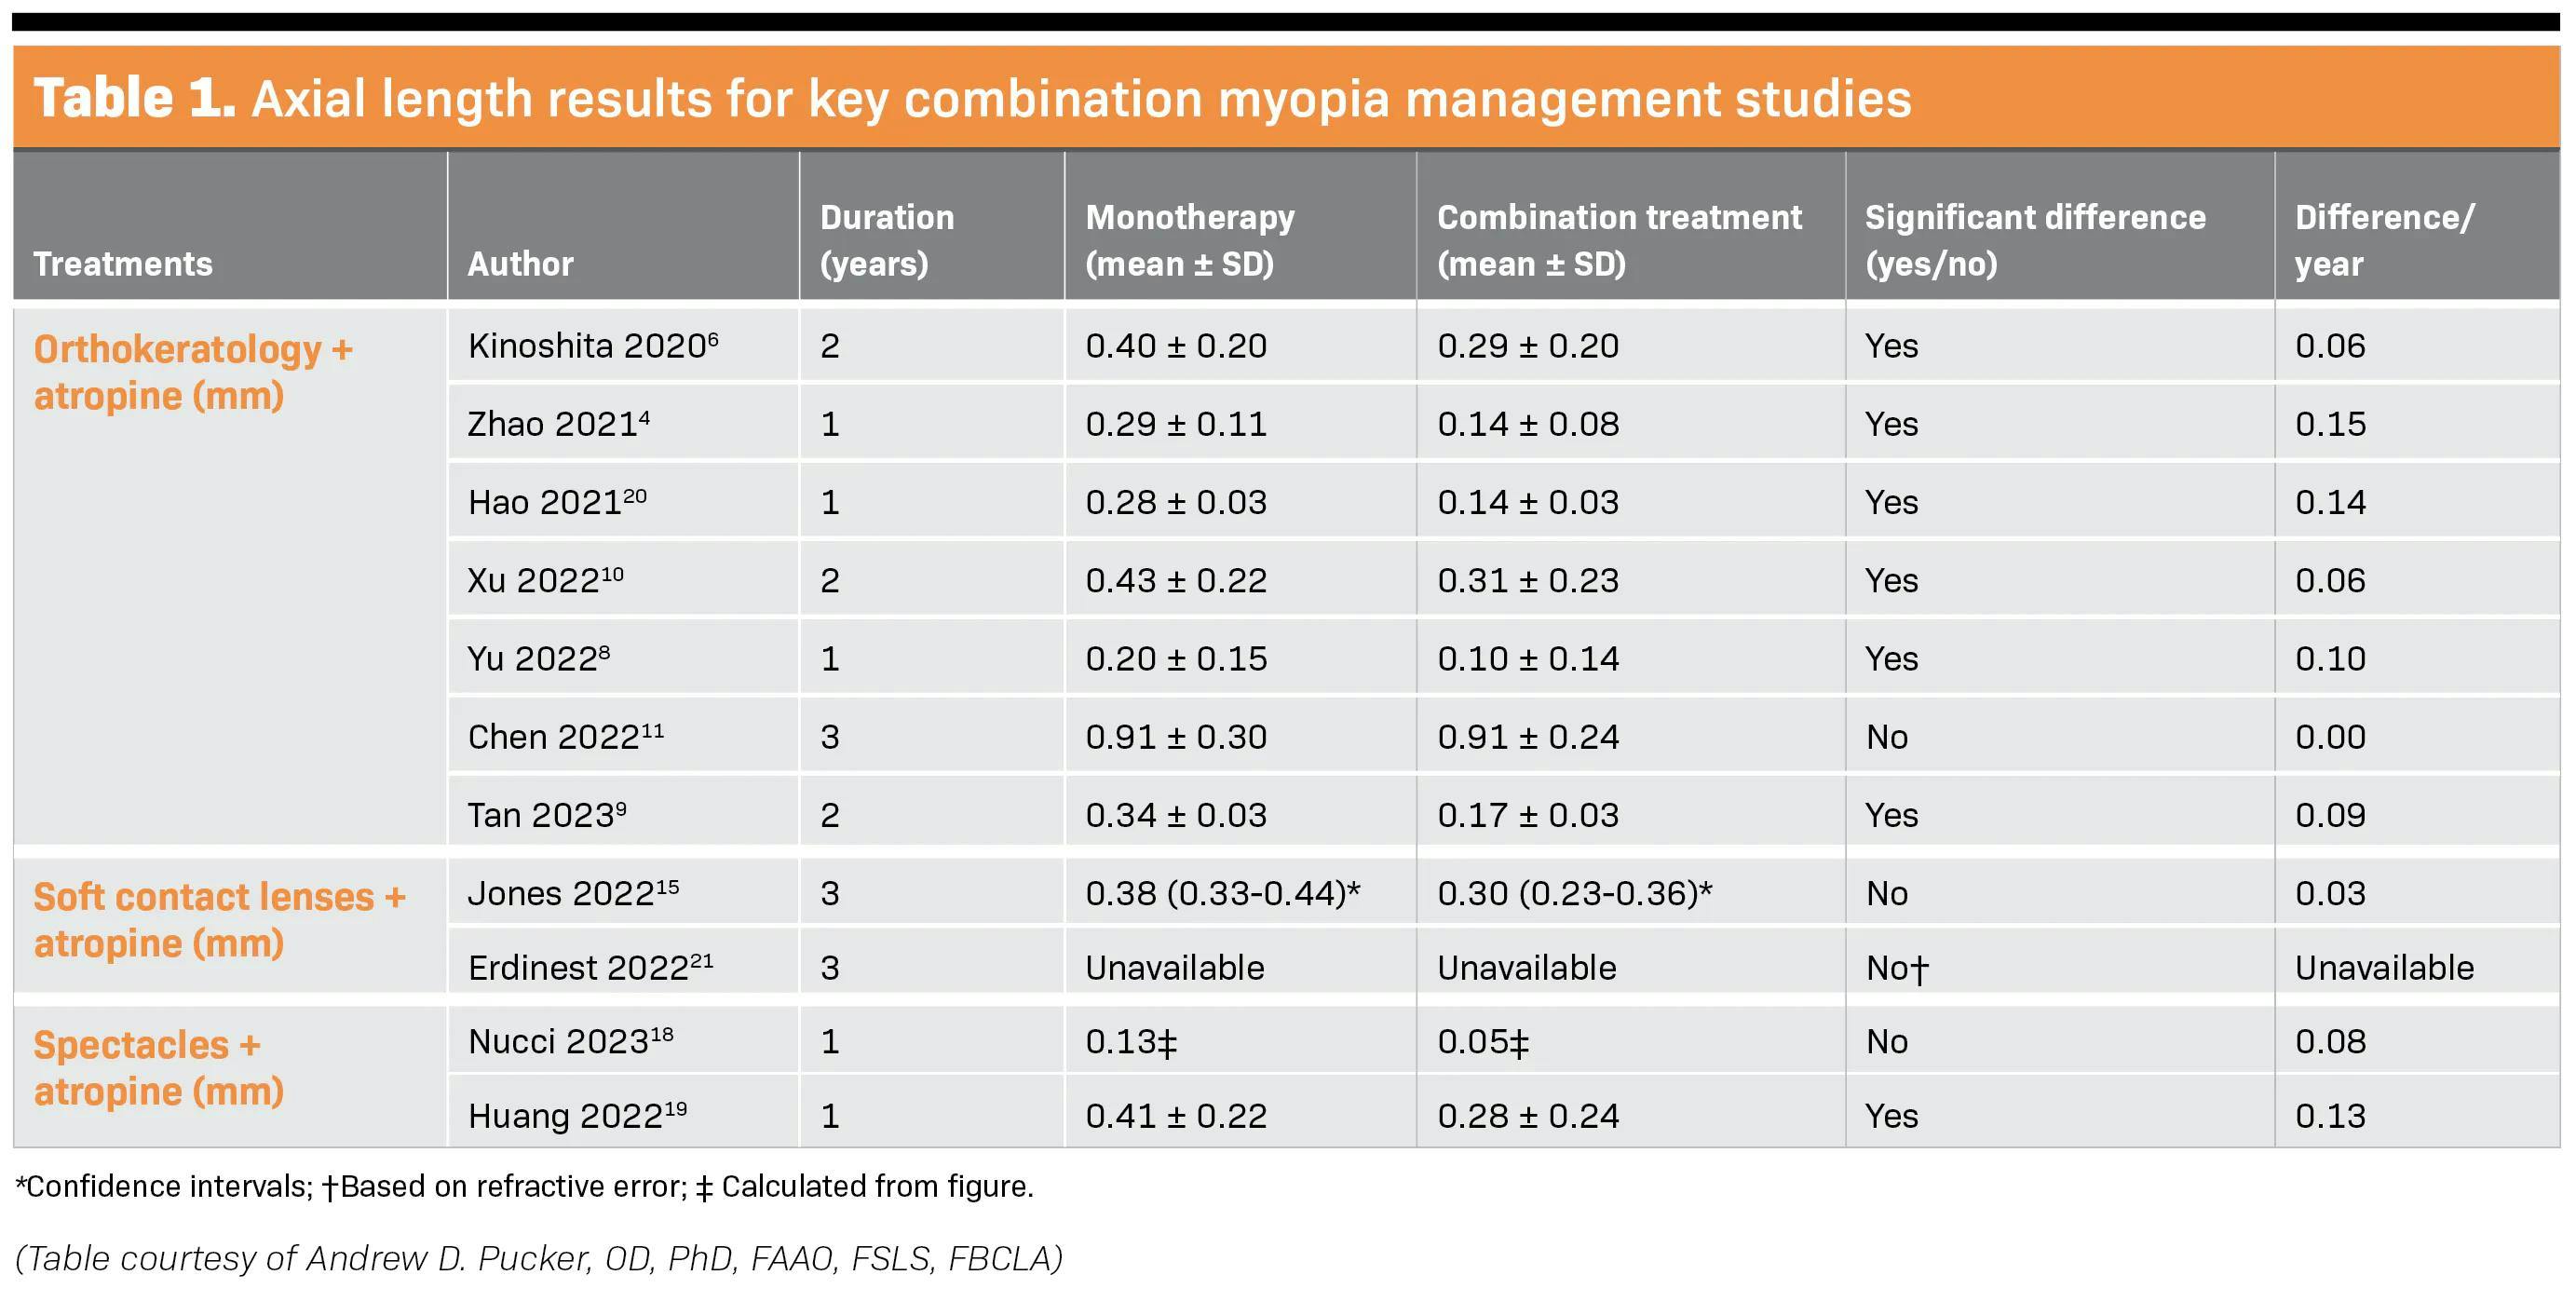 A table showing axial length results for key combination myopia management studies